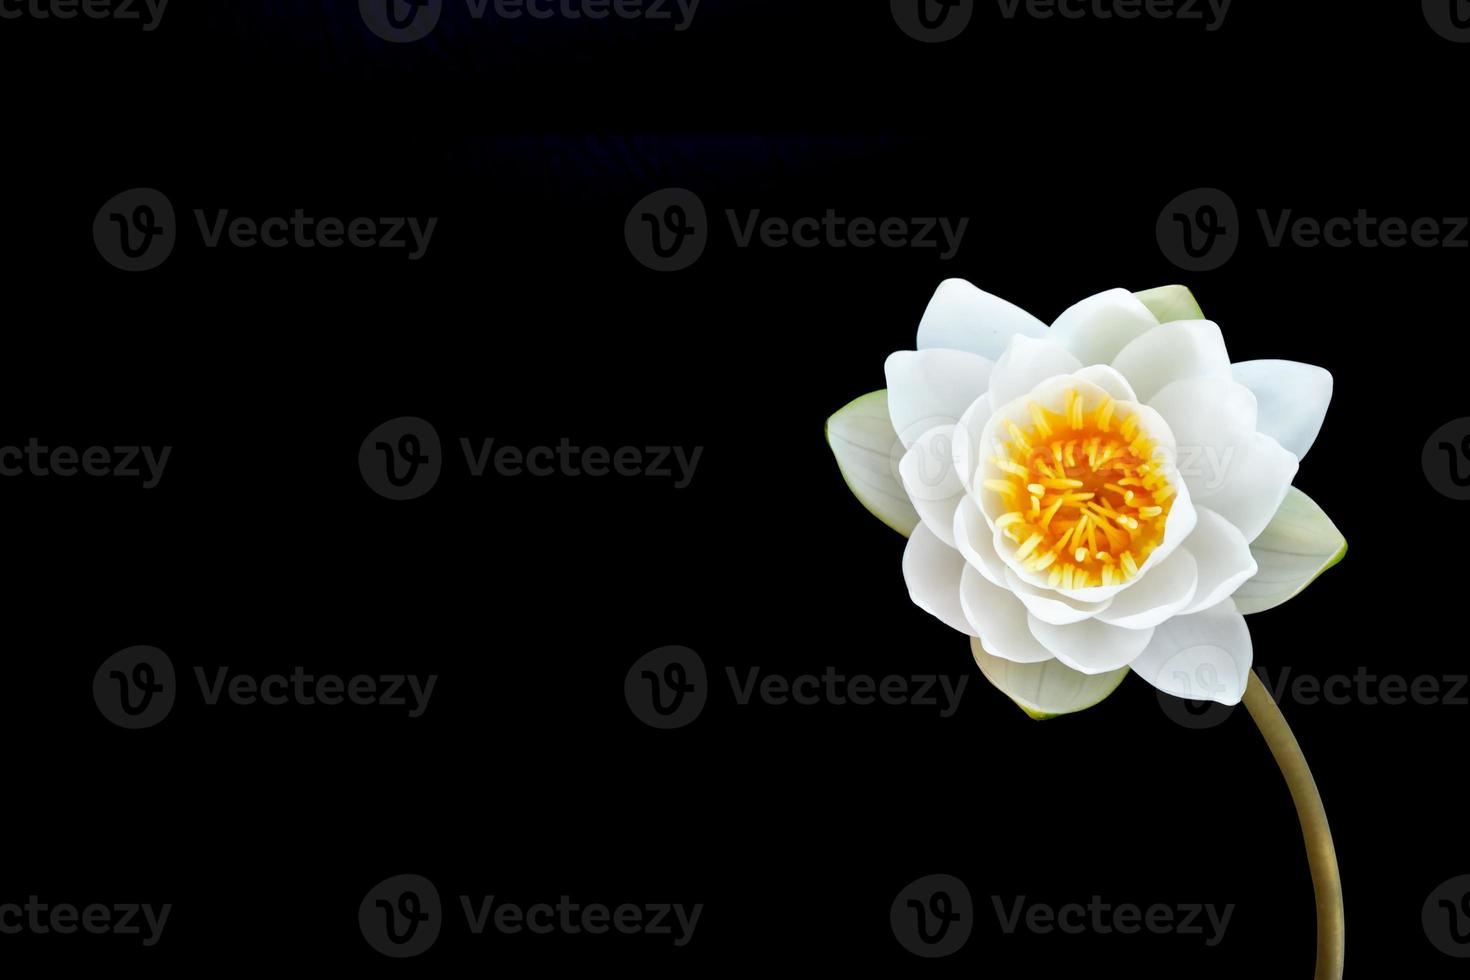 Flower water lily isolated on black background. photo